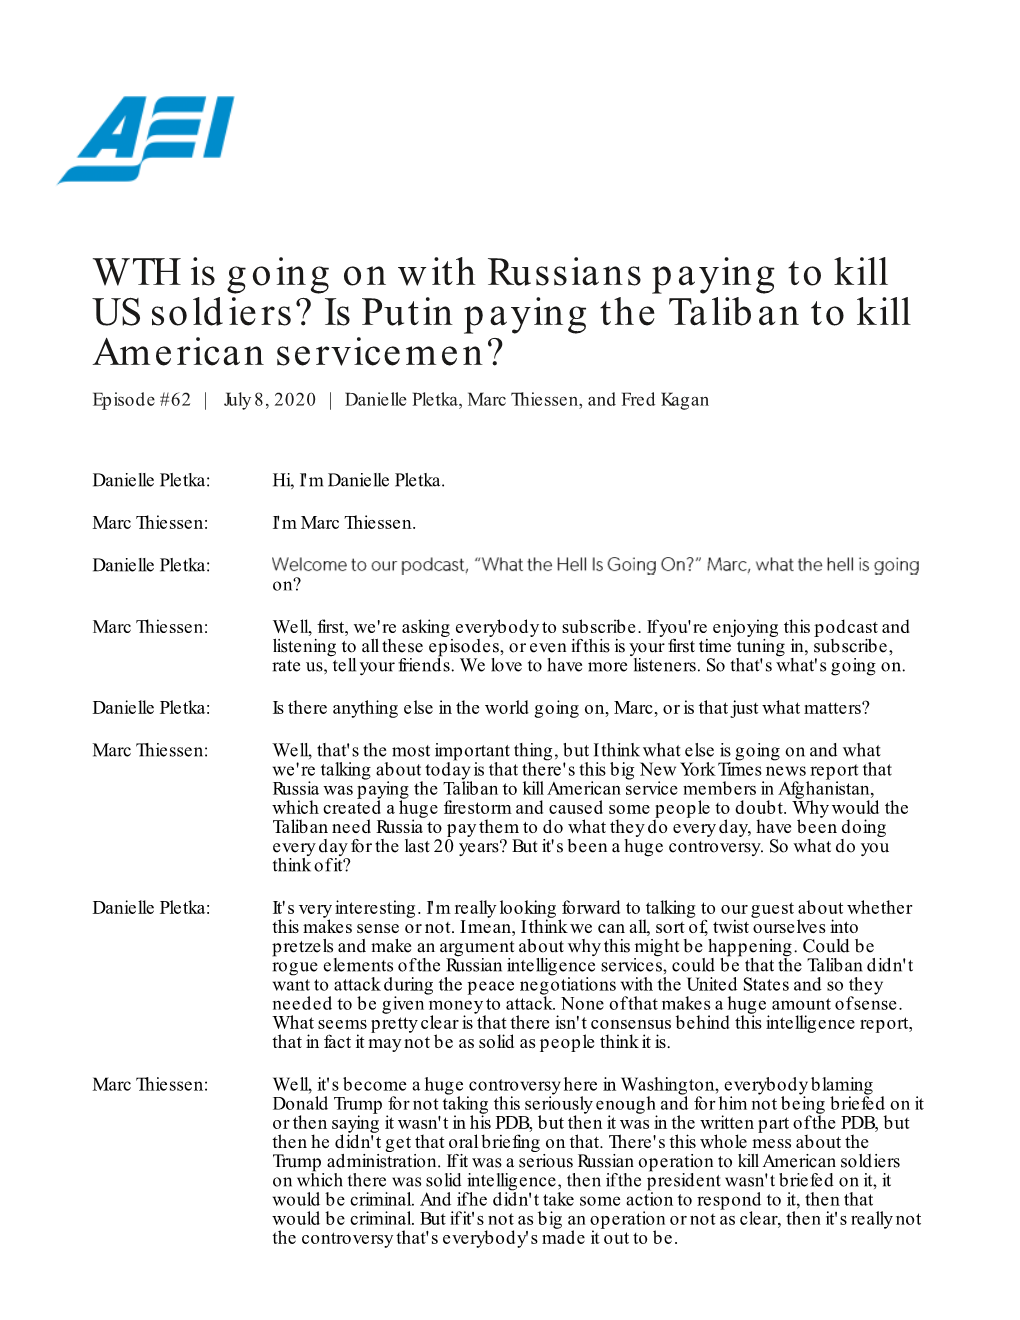 WTH Is Going on with Russians Paying to Kill US Soldiers? Is Putin Paying the Taliban to Kill American Servicemen?